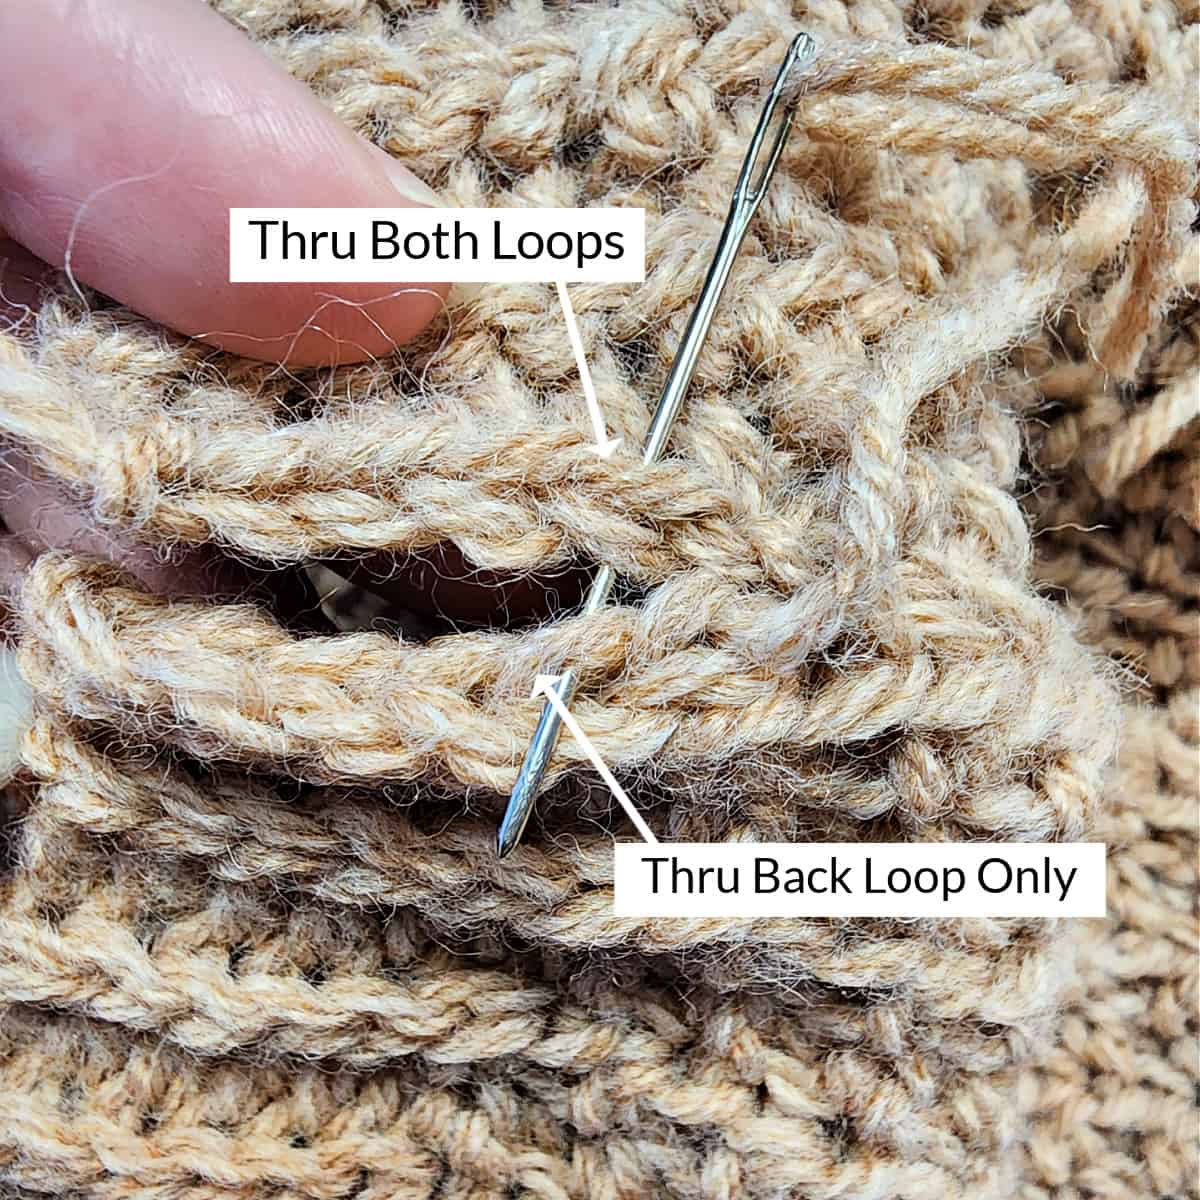 Yarn needle showing where to work the seam across the hat band portion of the crochet hat.